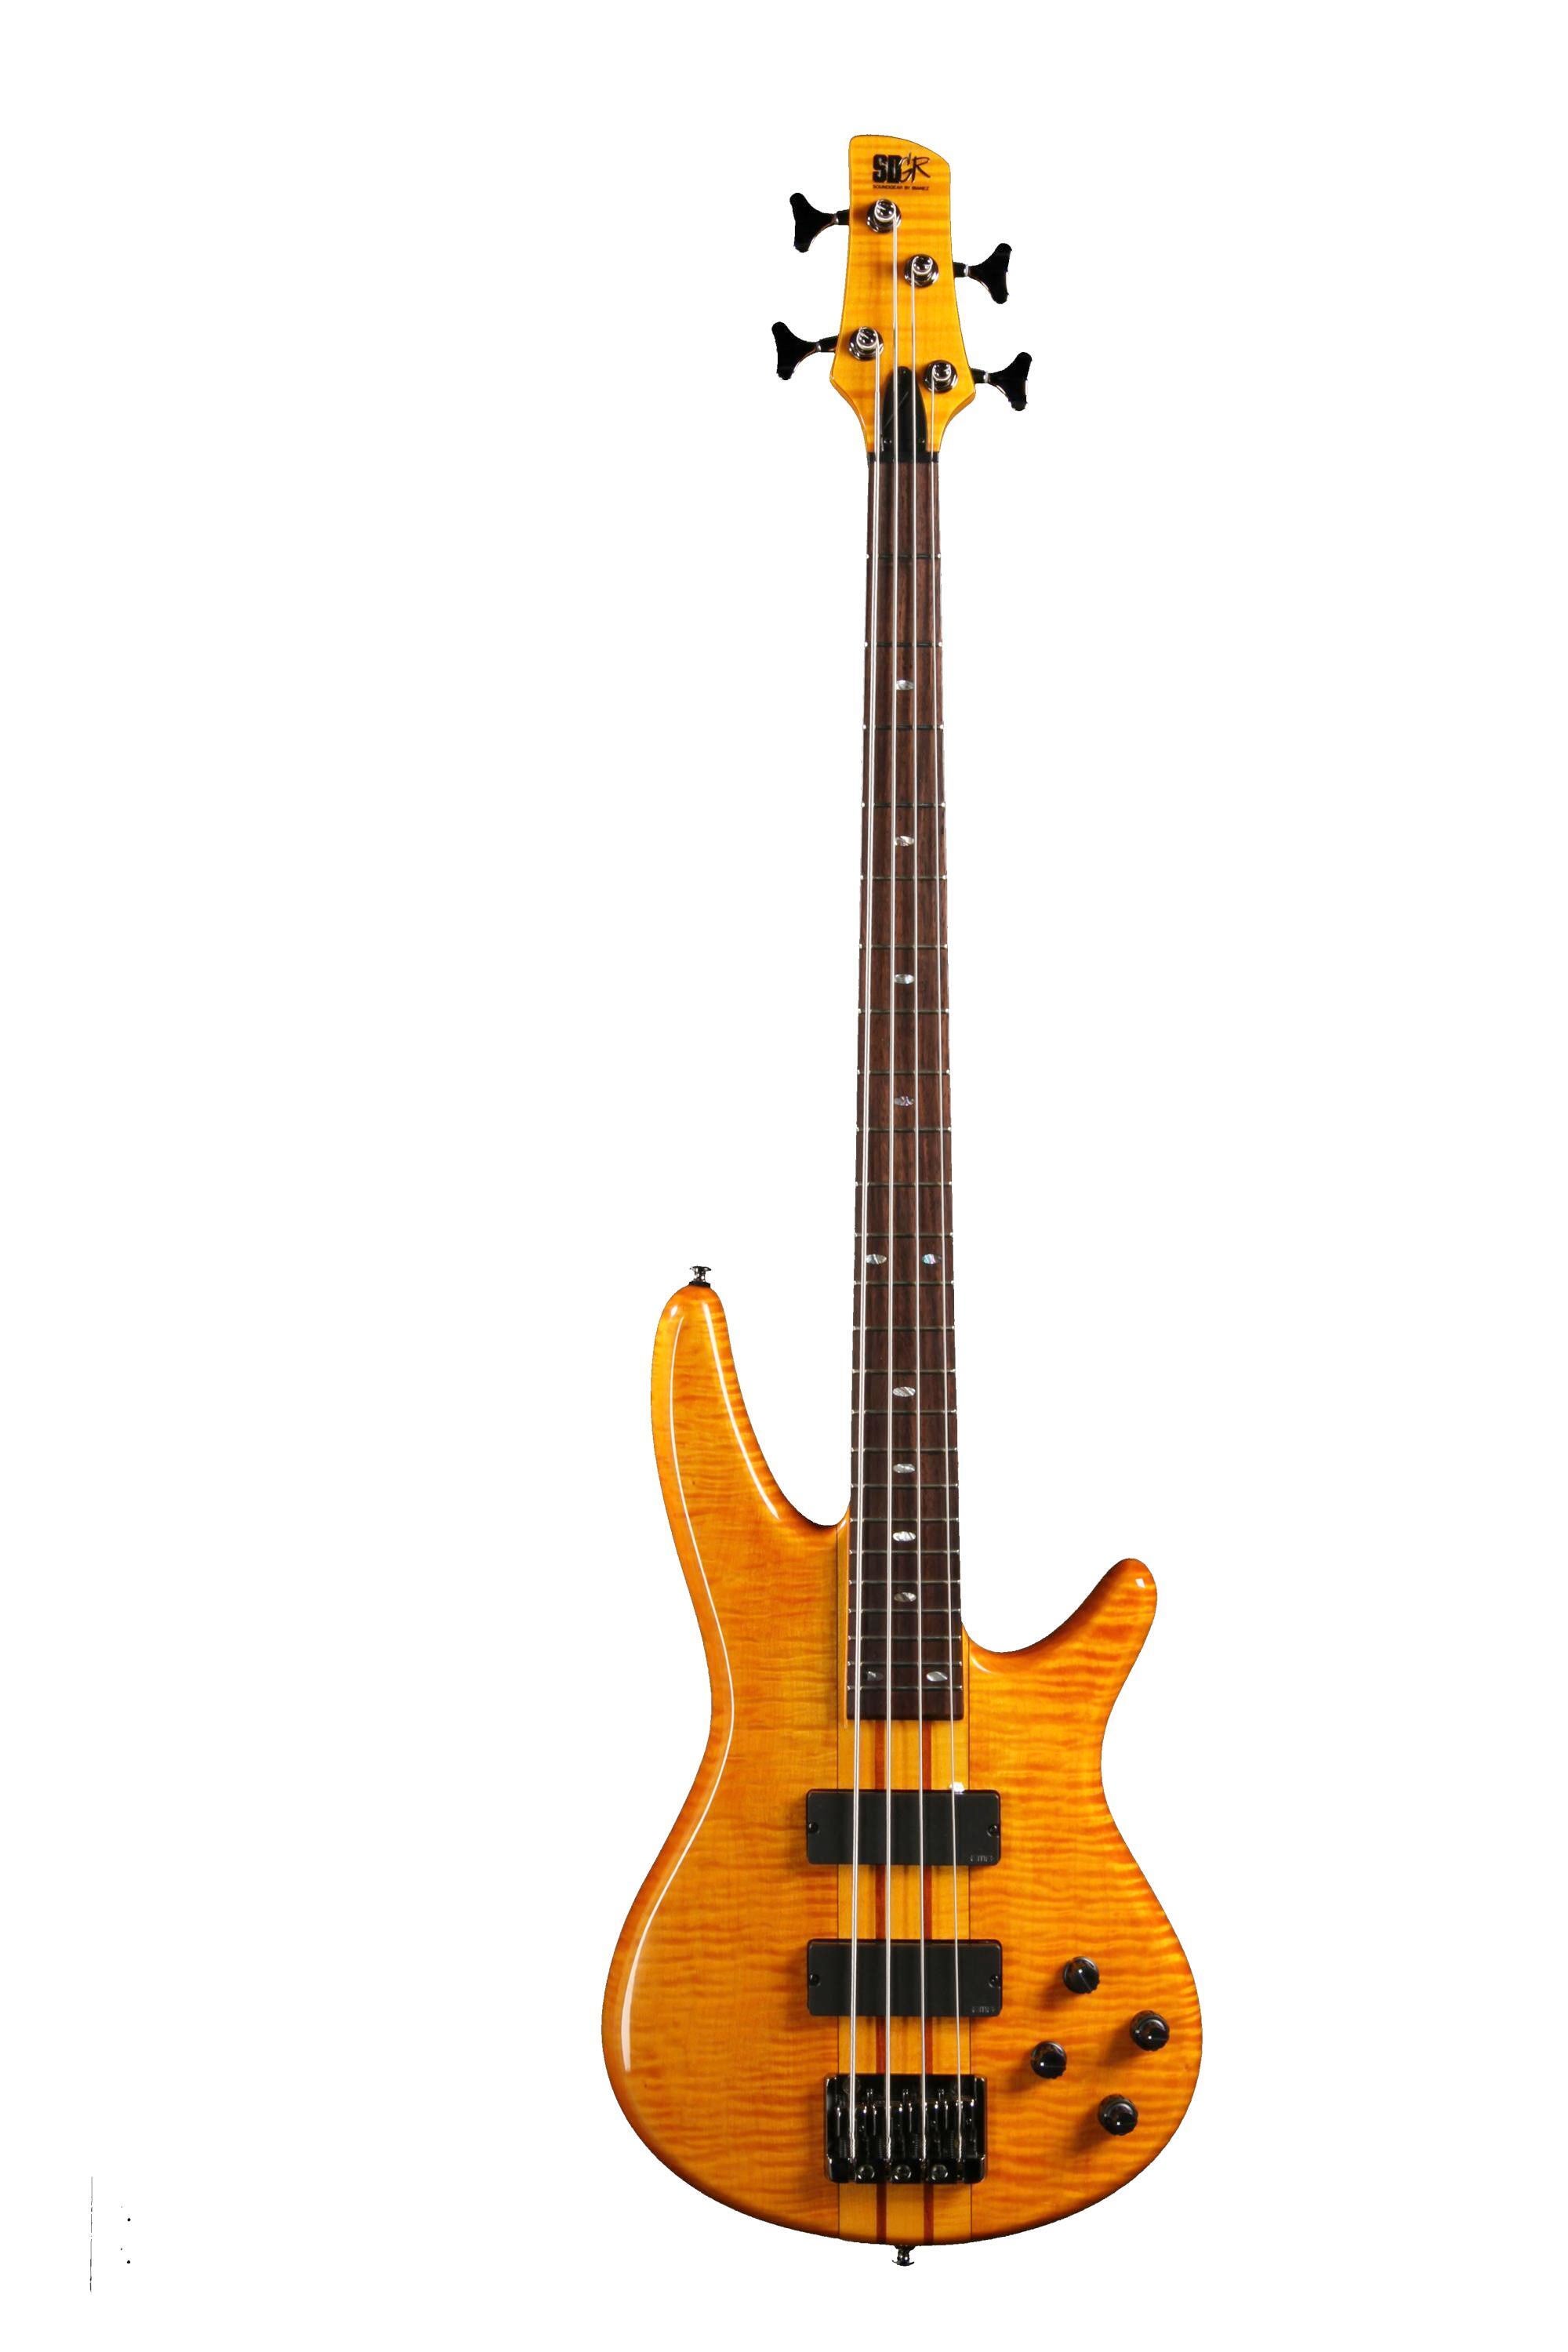 Ibanez SRT800DX - Amber | Sweetwater